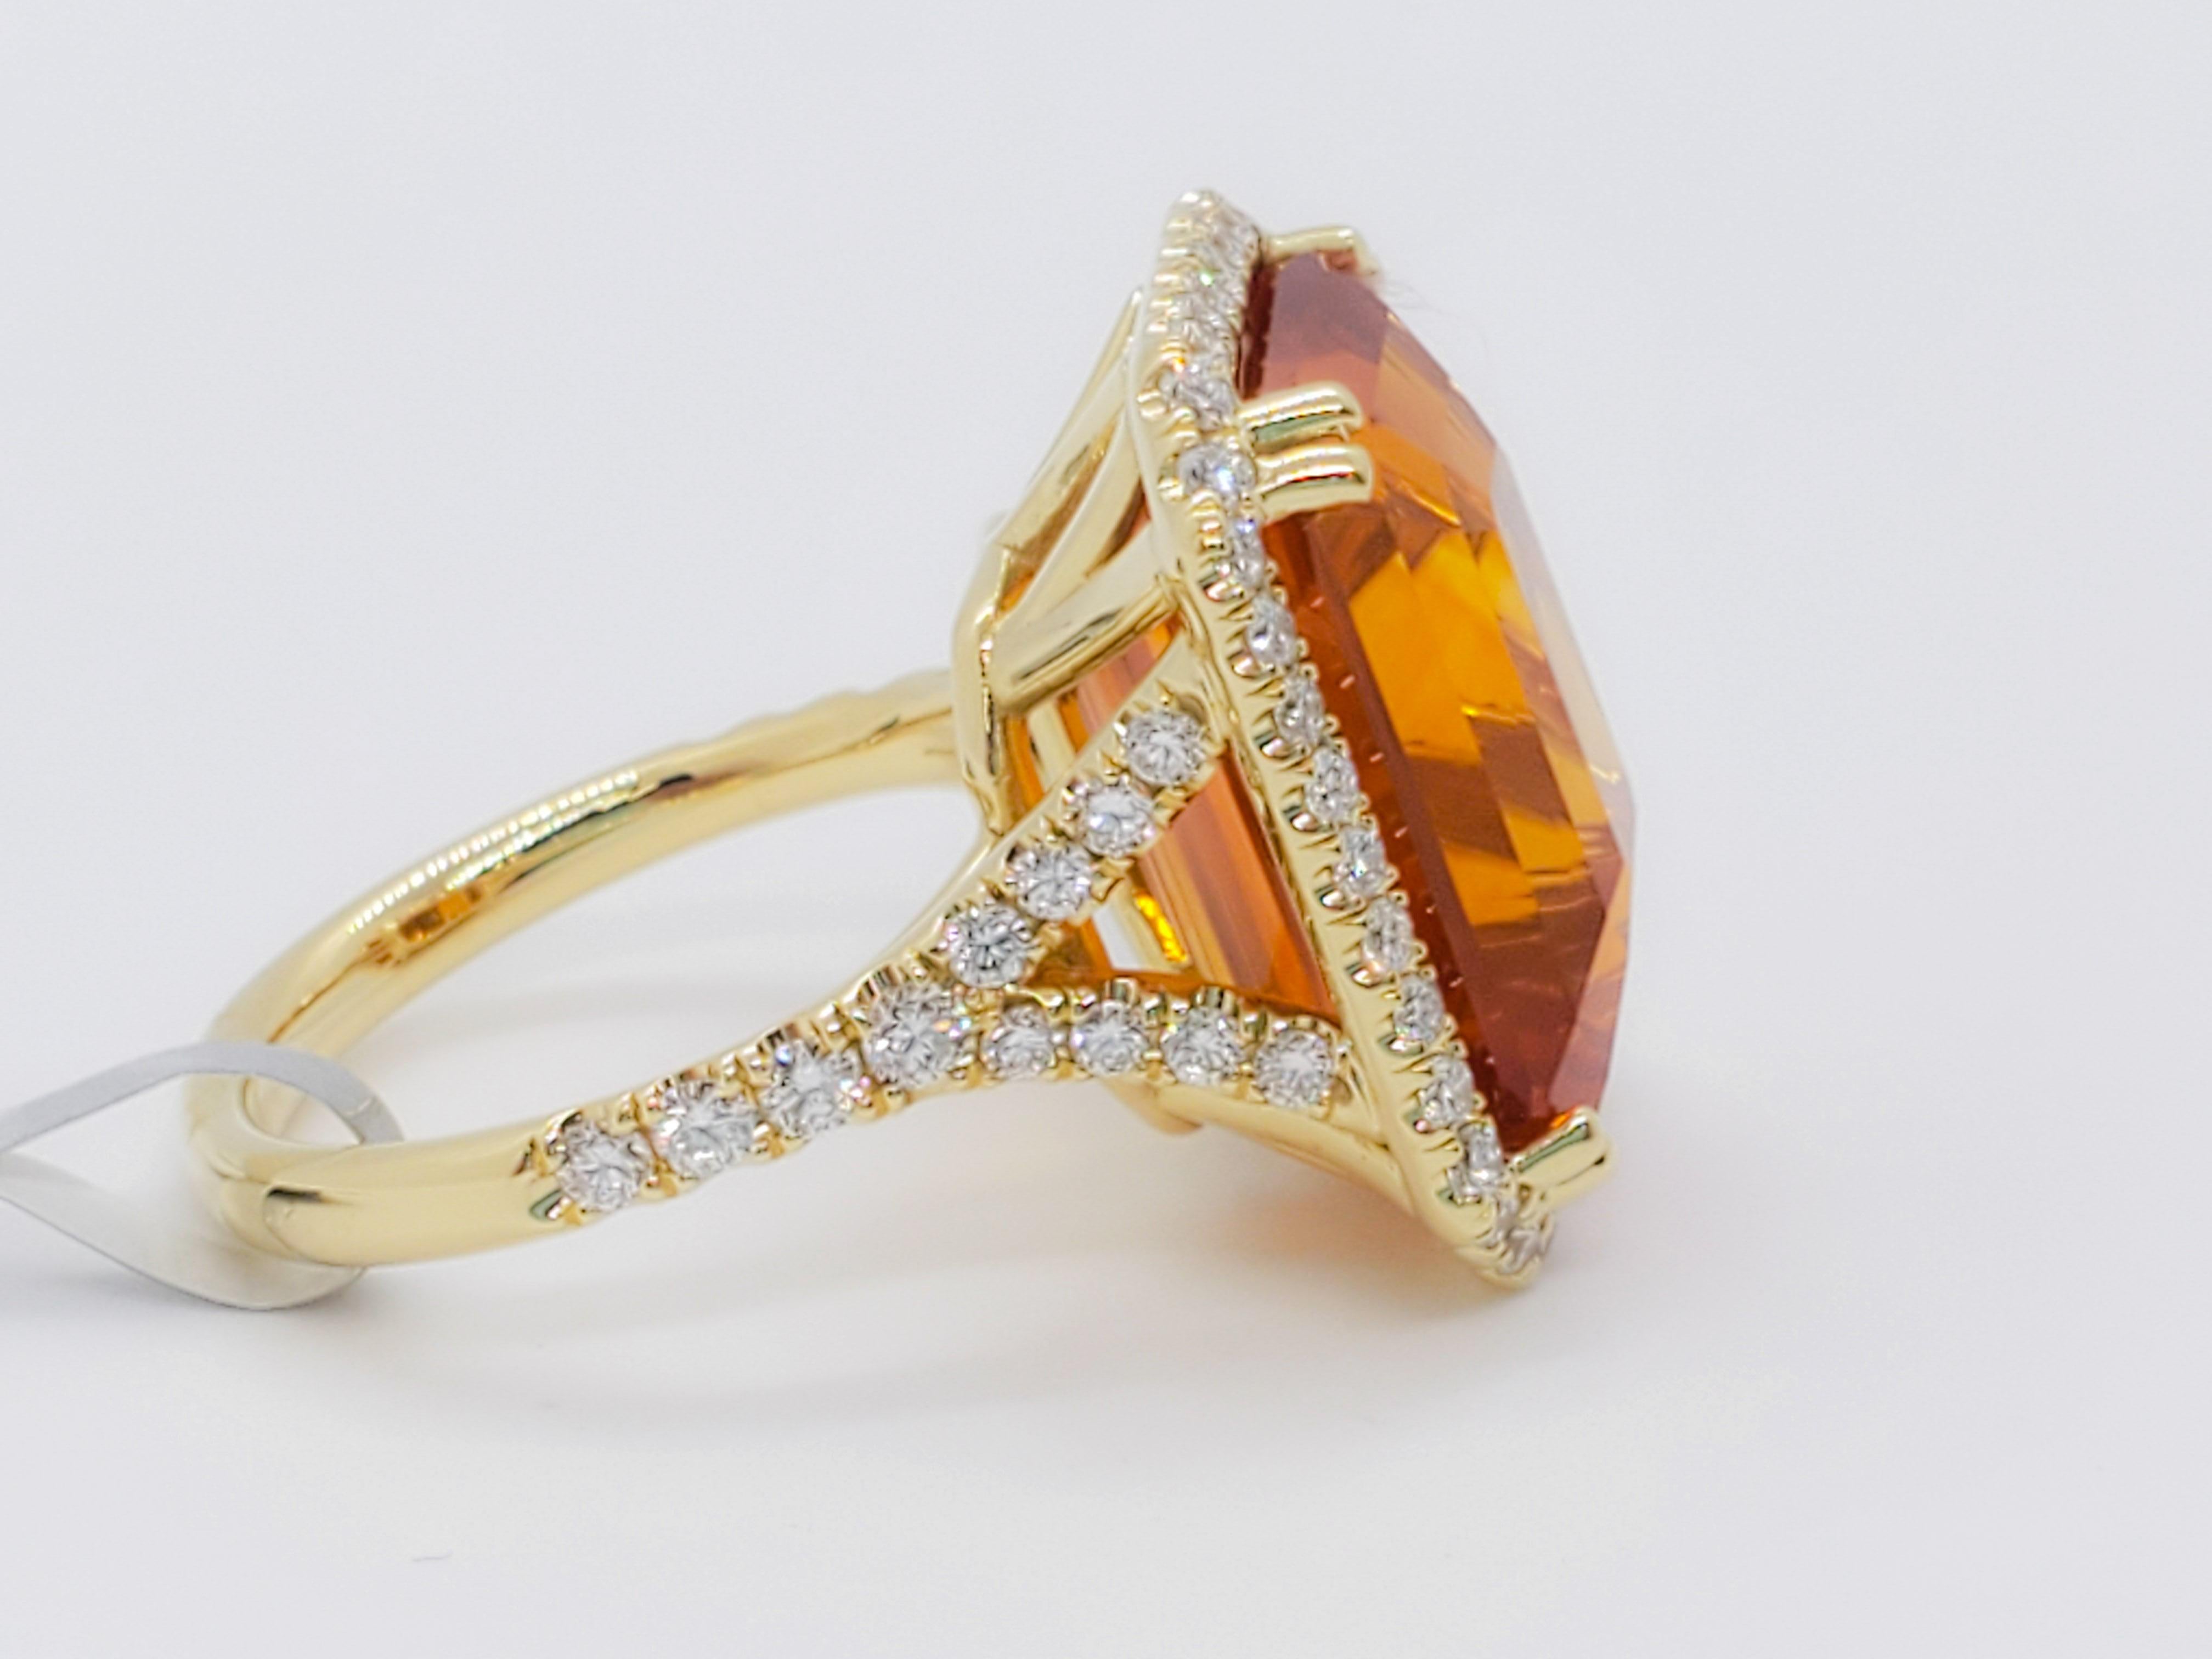 Stunning bright orange sapphire octagon that weighs 20.10 cts.  The color of orange on this stone is incredible and the shape is hard to find.  It has 0.93 ct of good quality, white, and bright diamond rounds.  Handmade mounting in 18k yellow gold. 